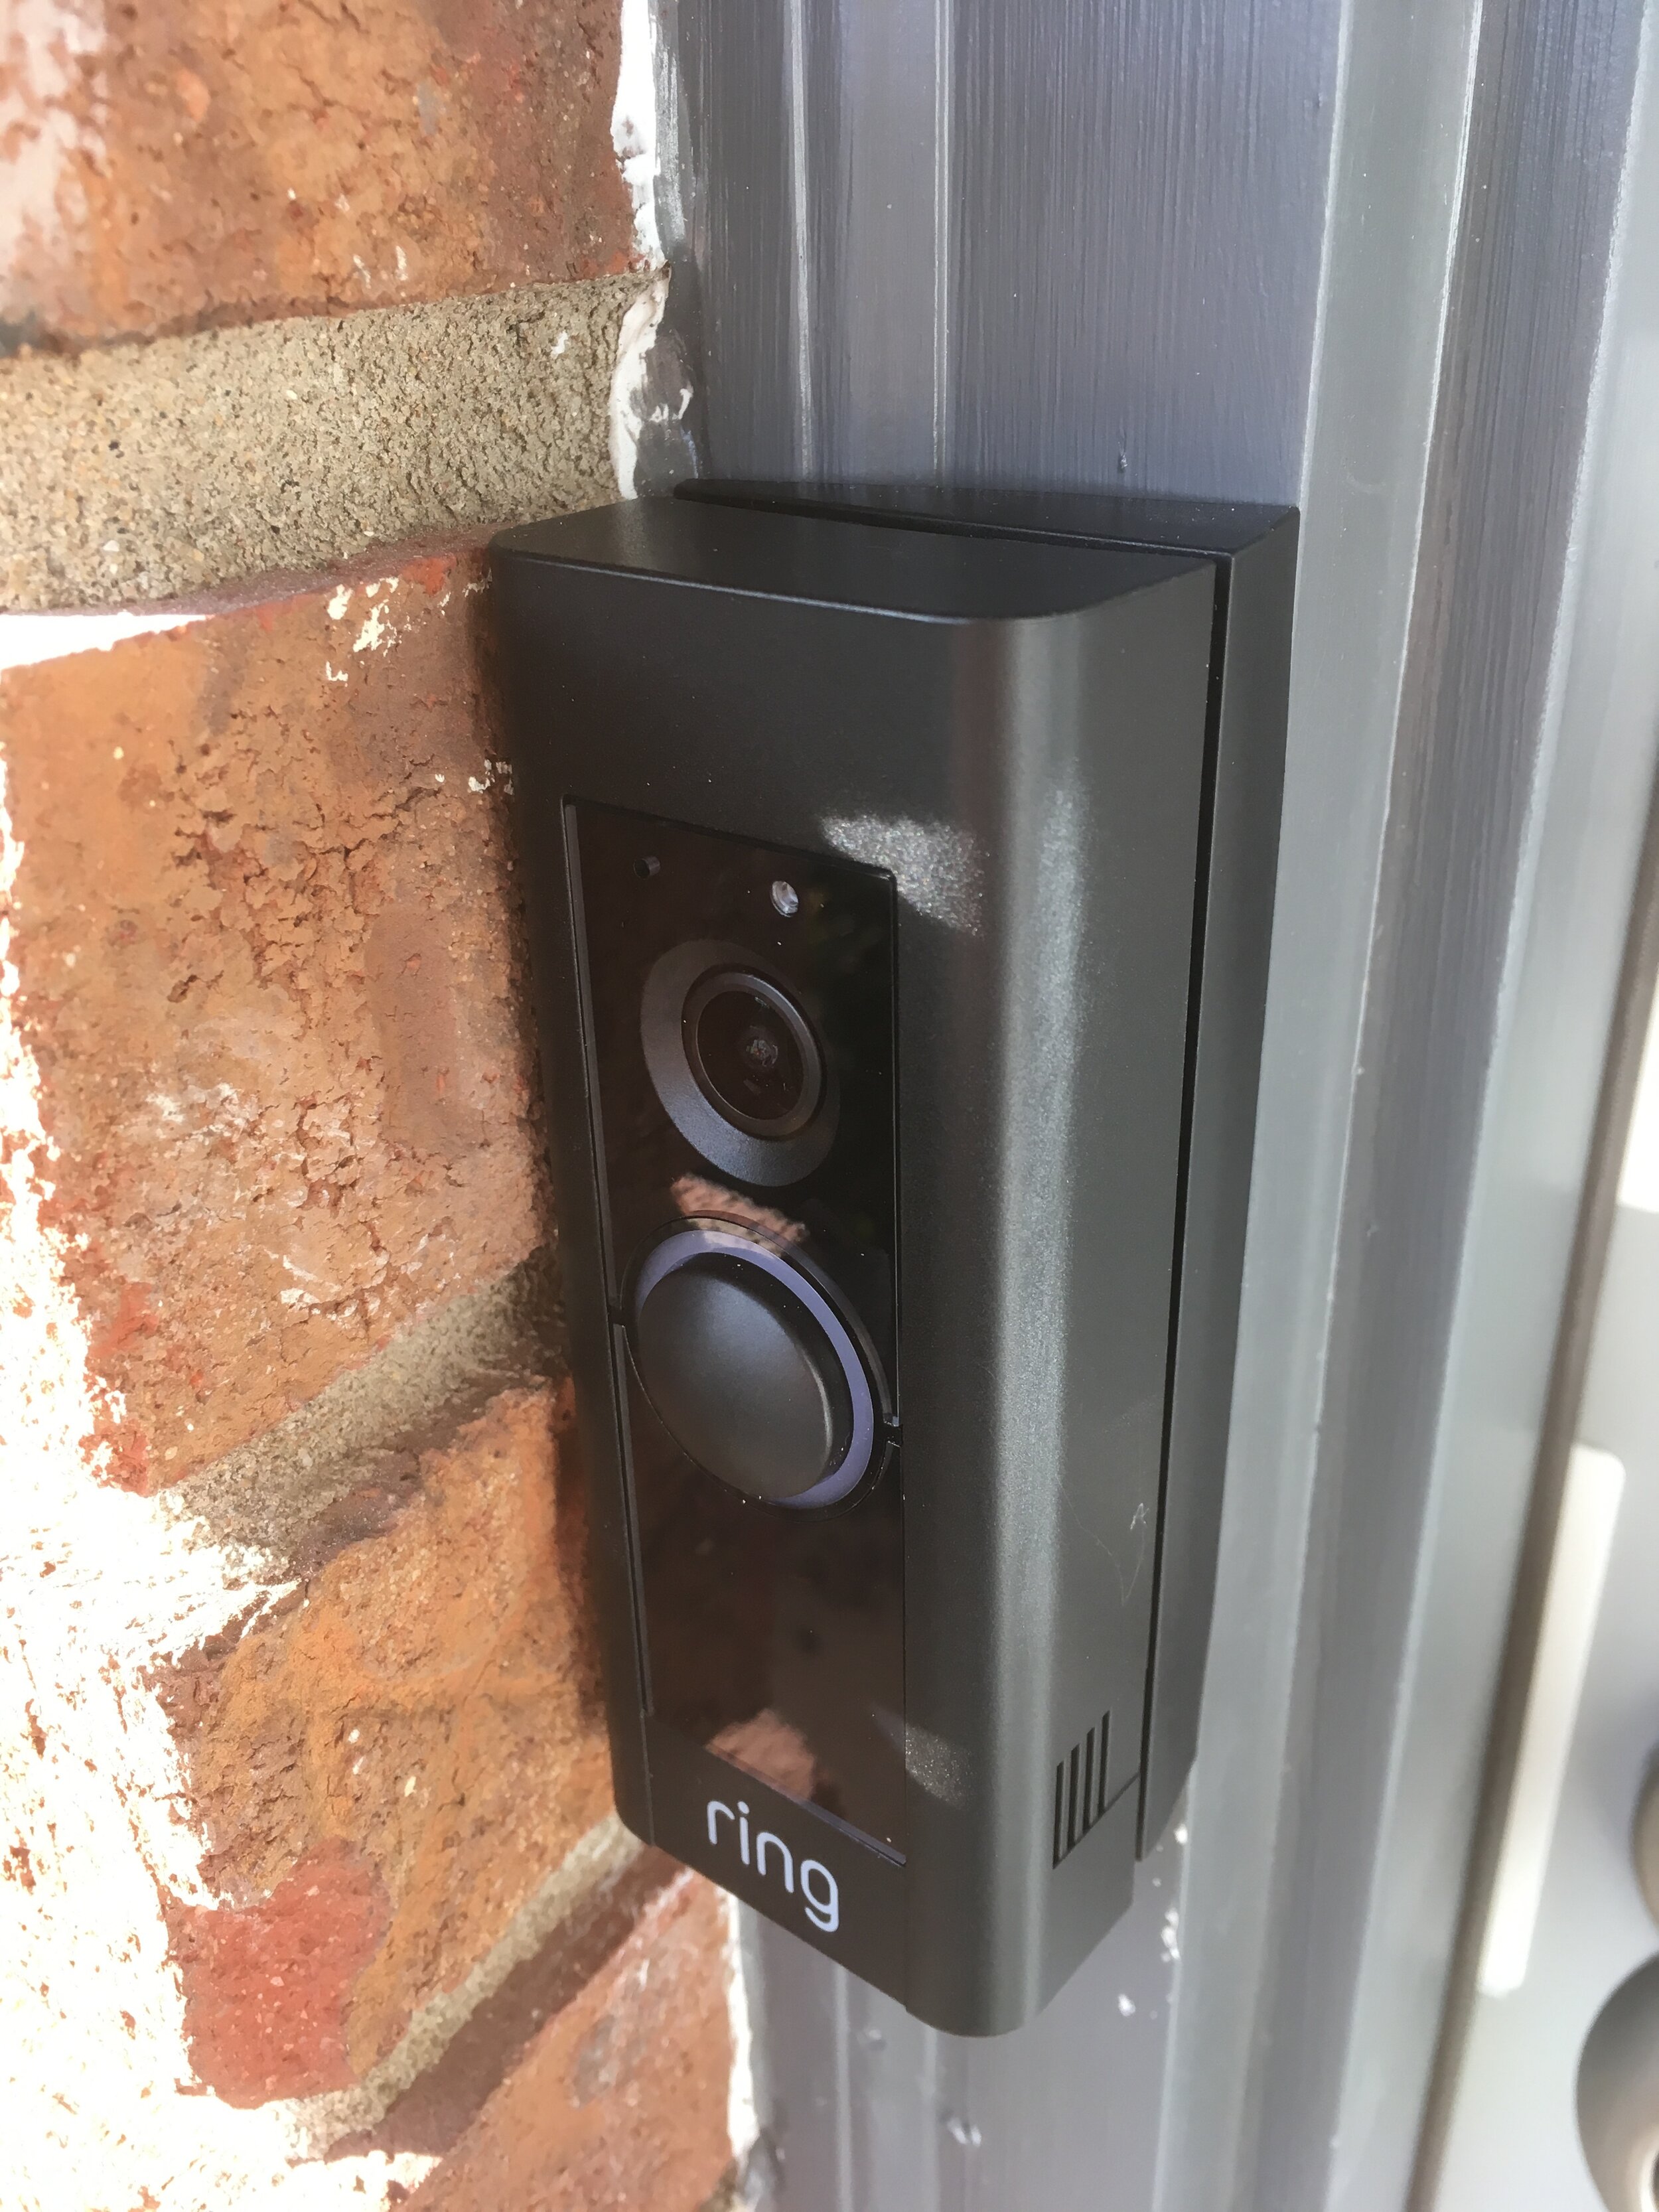 is it easy to install the ring doorbell